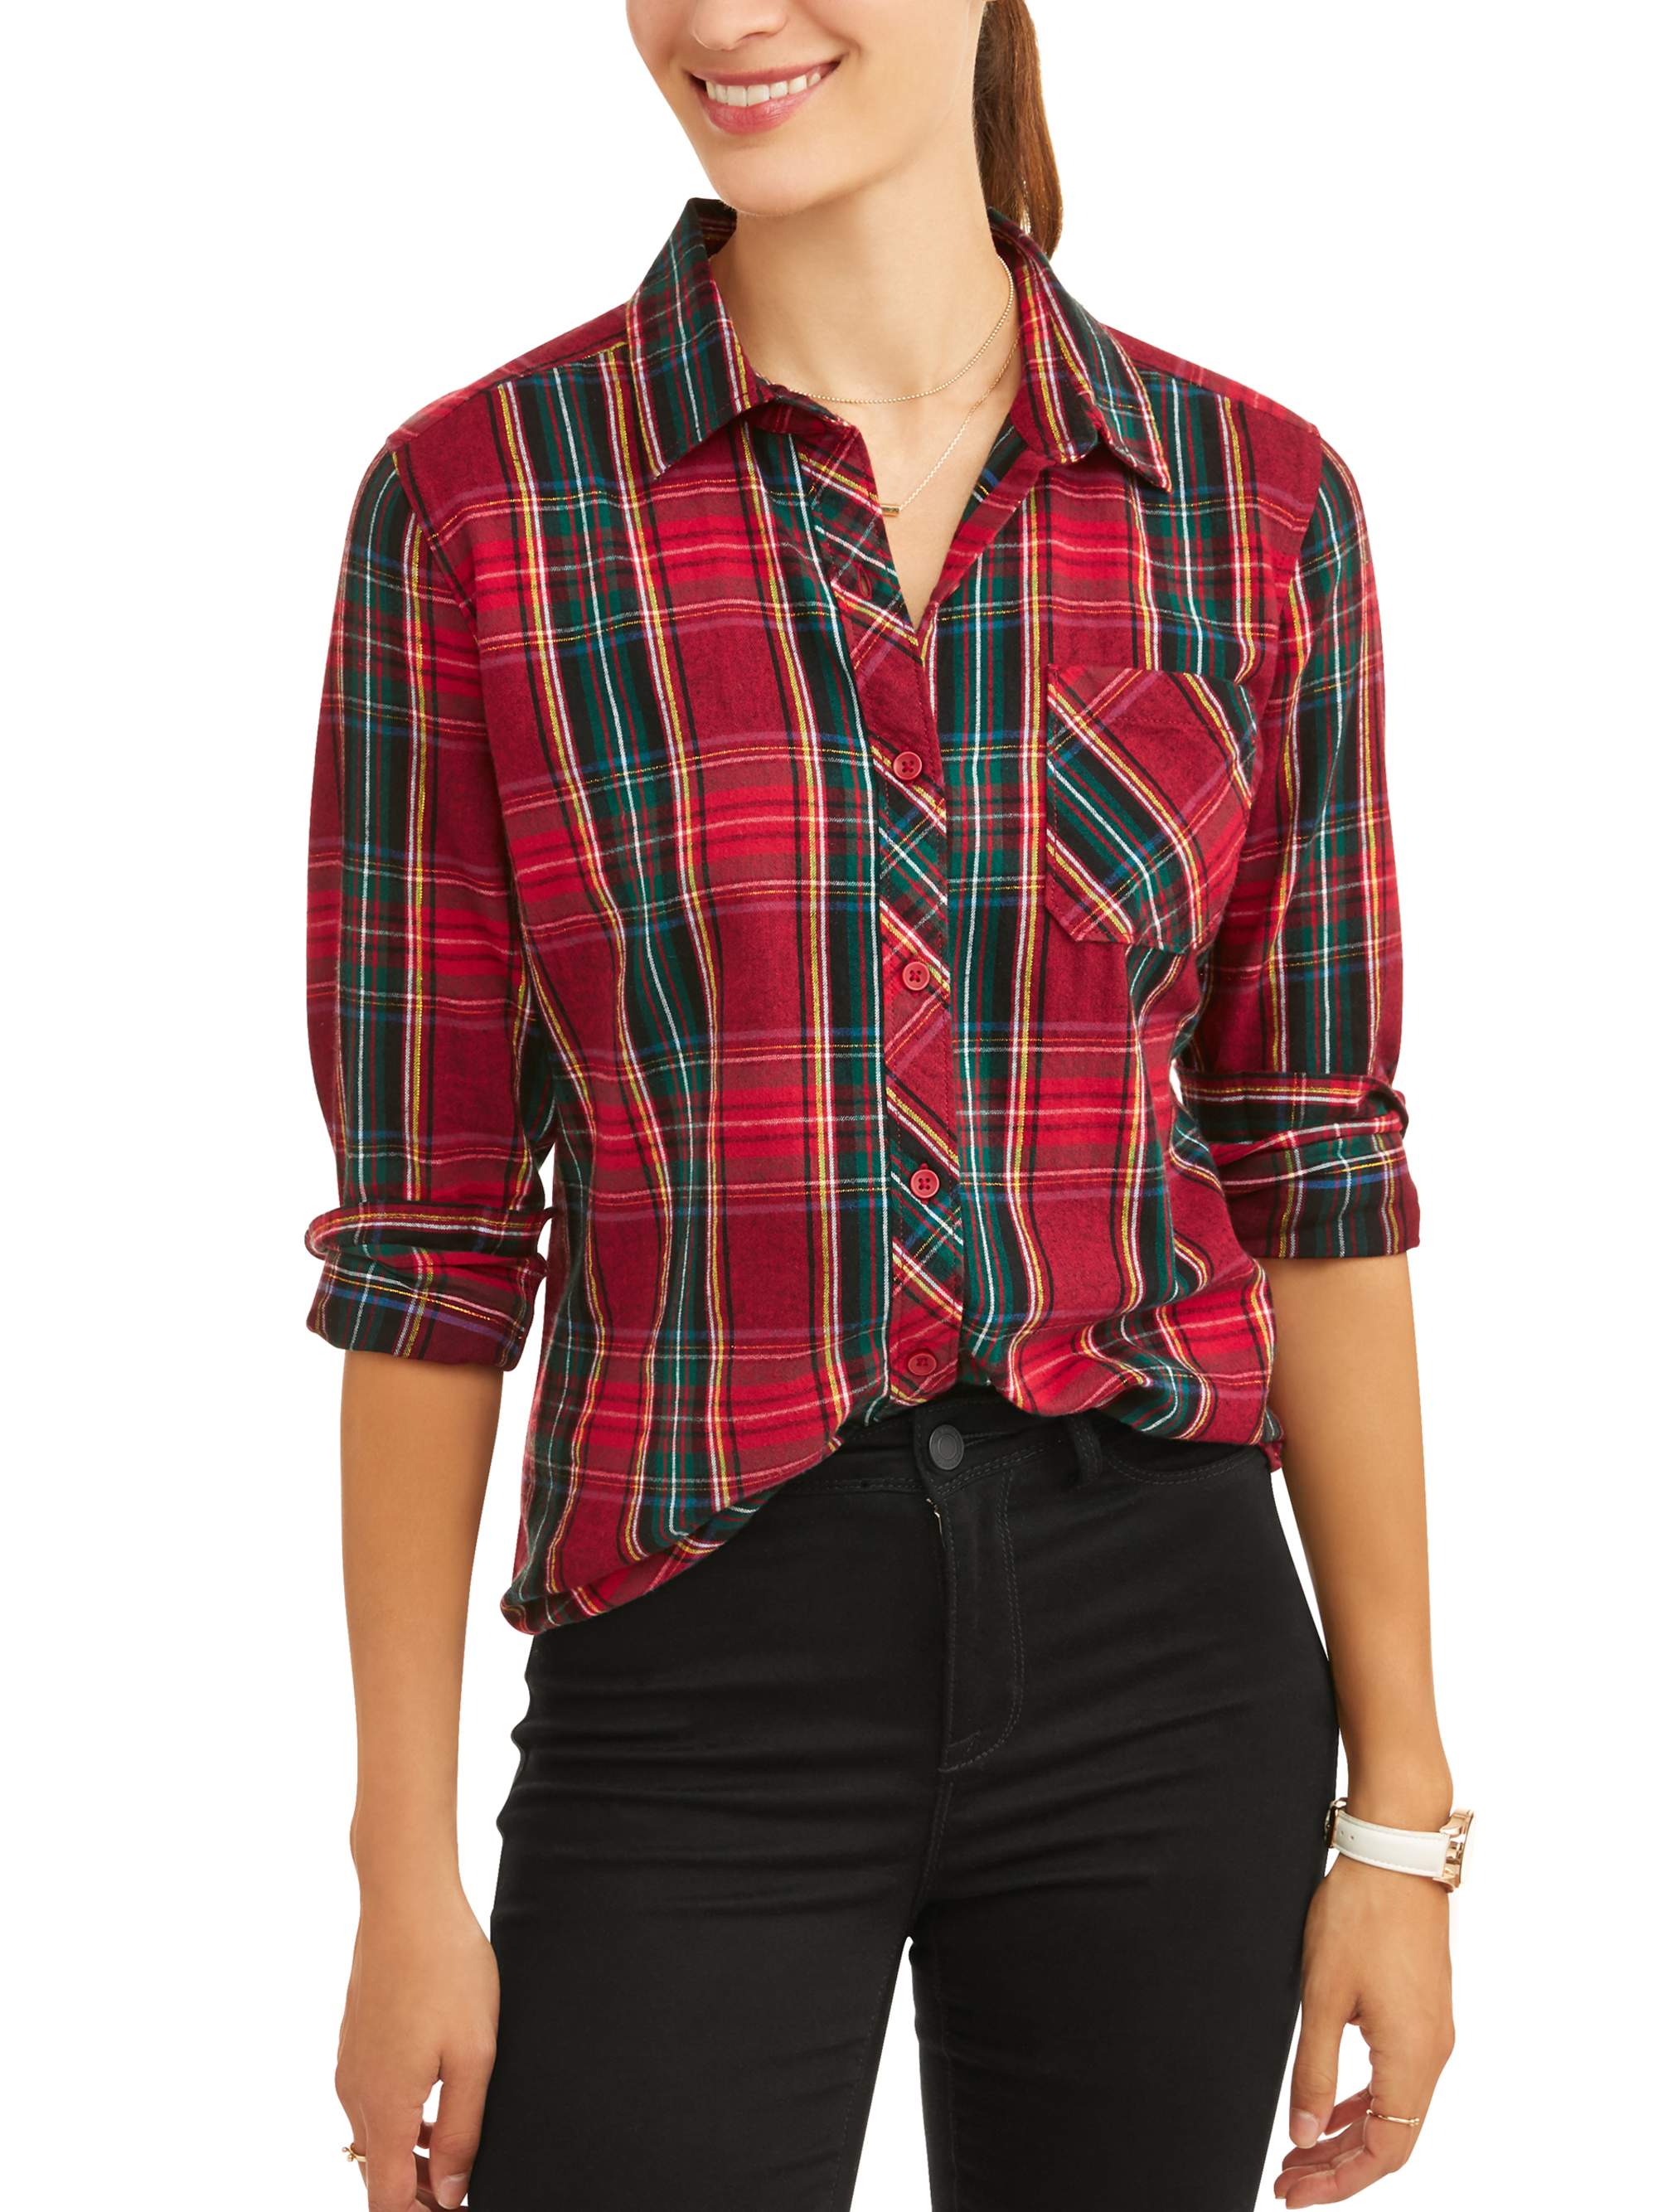 Time and Tru Women's Brushed Cotton Plaid Shirt - image 1 of 6